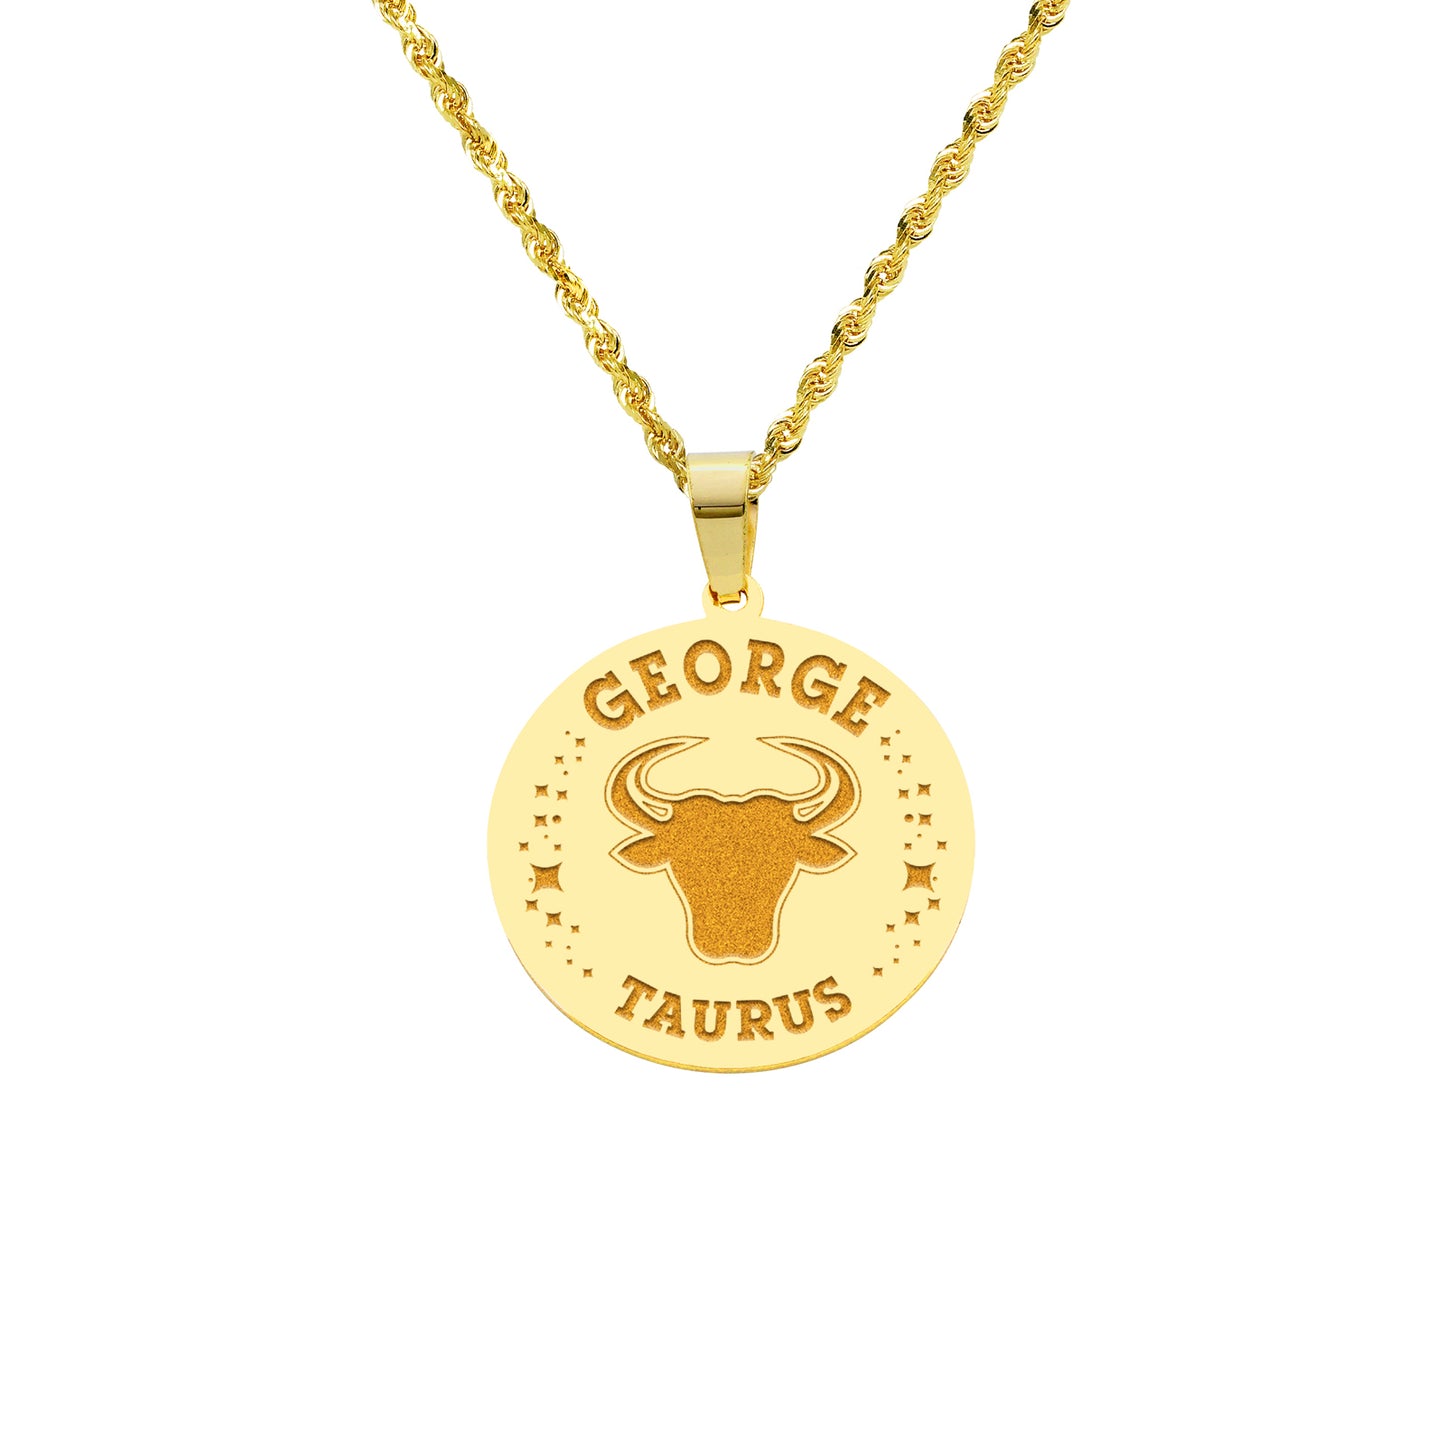 Zodiac Engraved Pendant with Customizable Name in High Polished 14K Gold | 0.75" Taurus